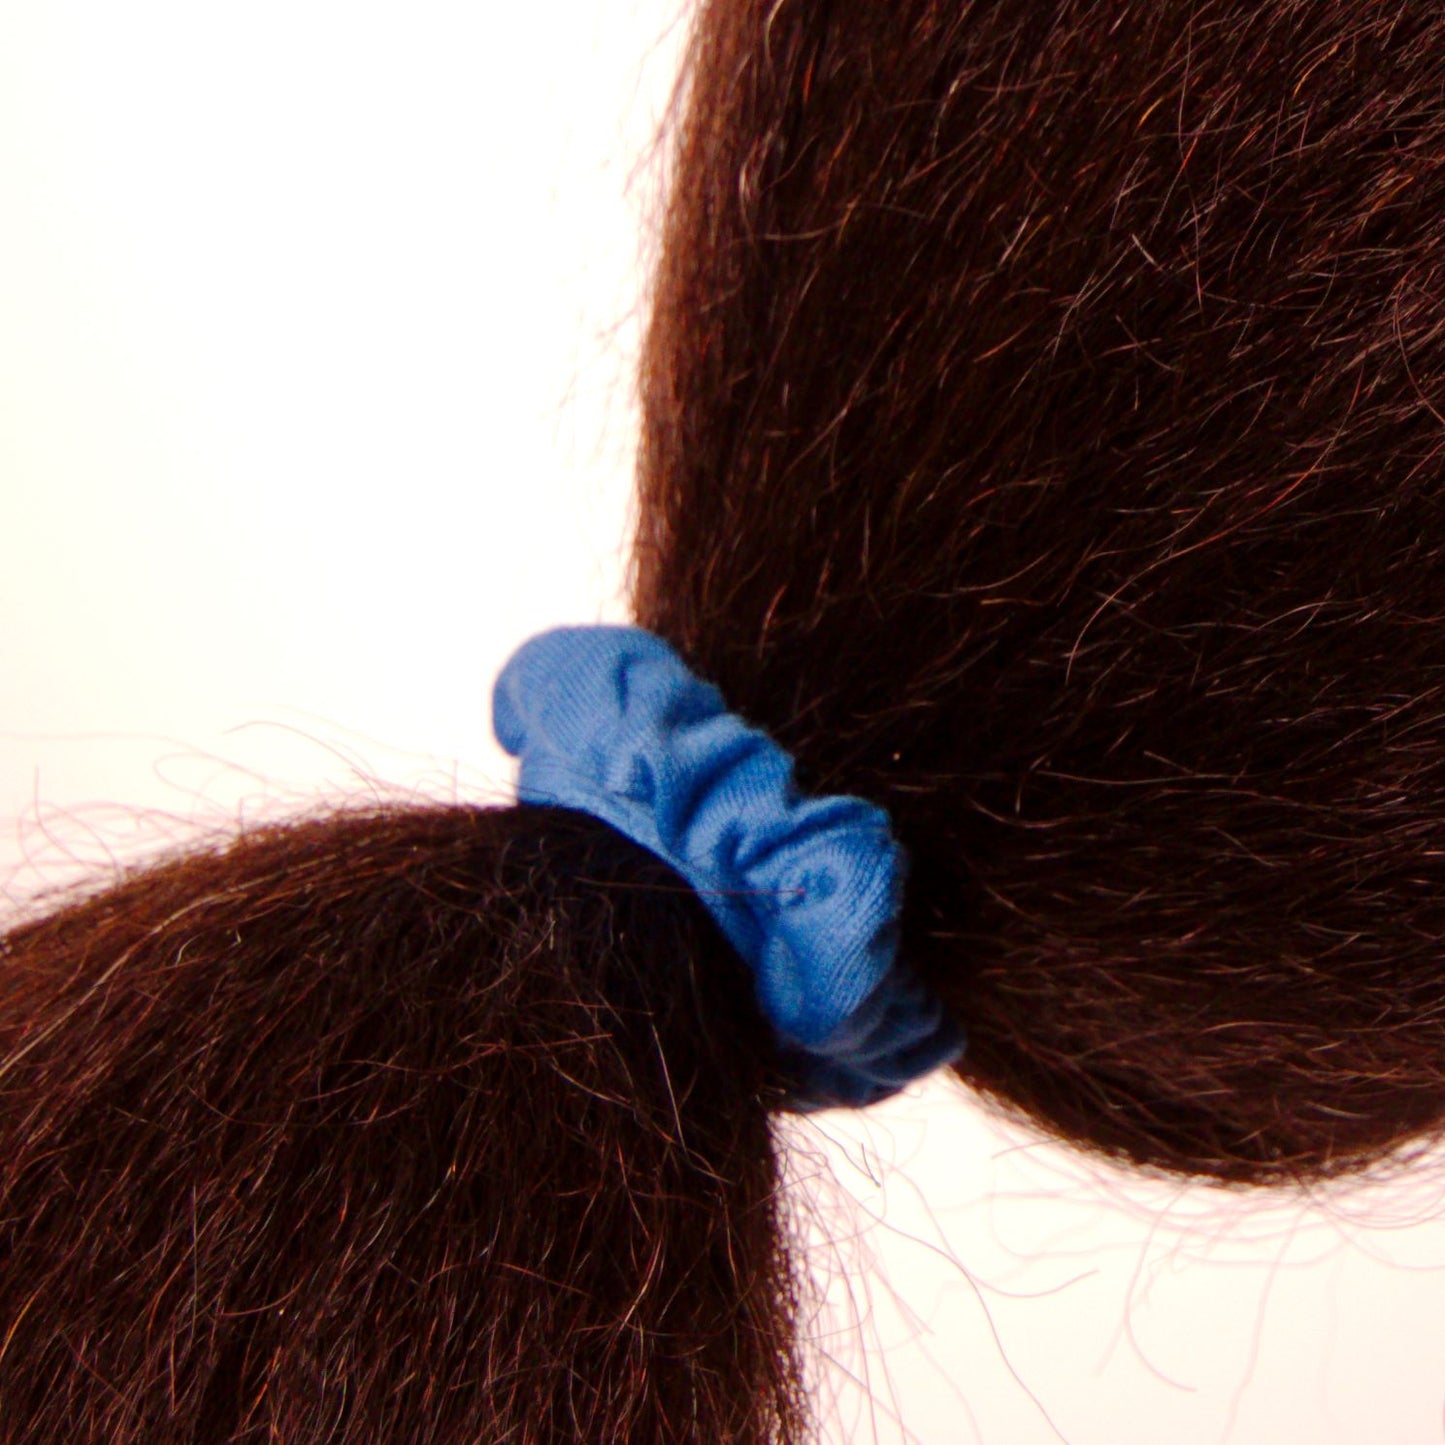 Amelia Beauty, Blue Jersey Scrunchies, 2.25in Diameter, Gentle on Hair, Strong Hold, No Snag, No Dents or Creases. 12 Pack